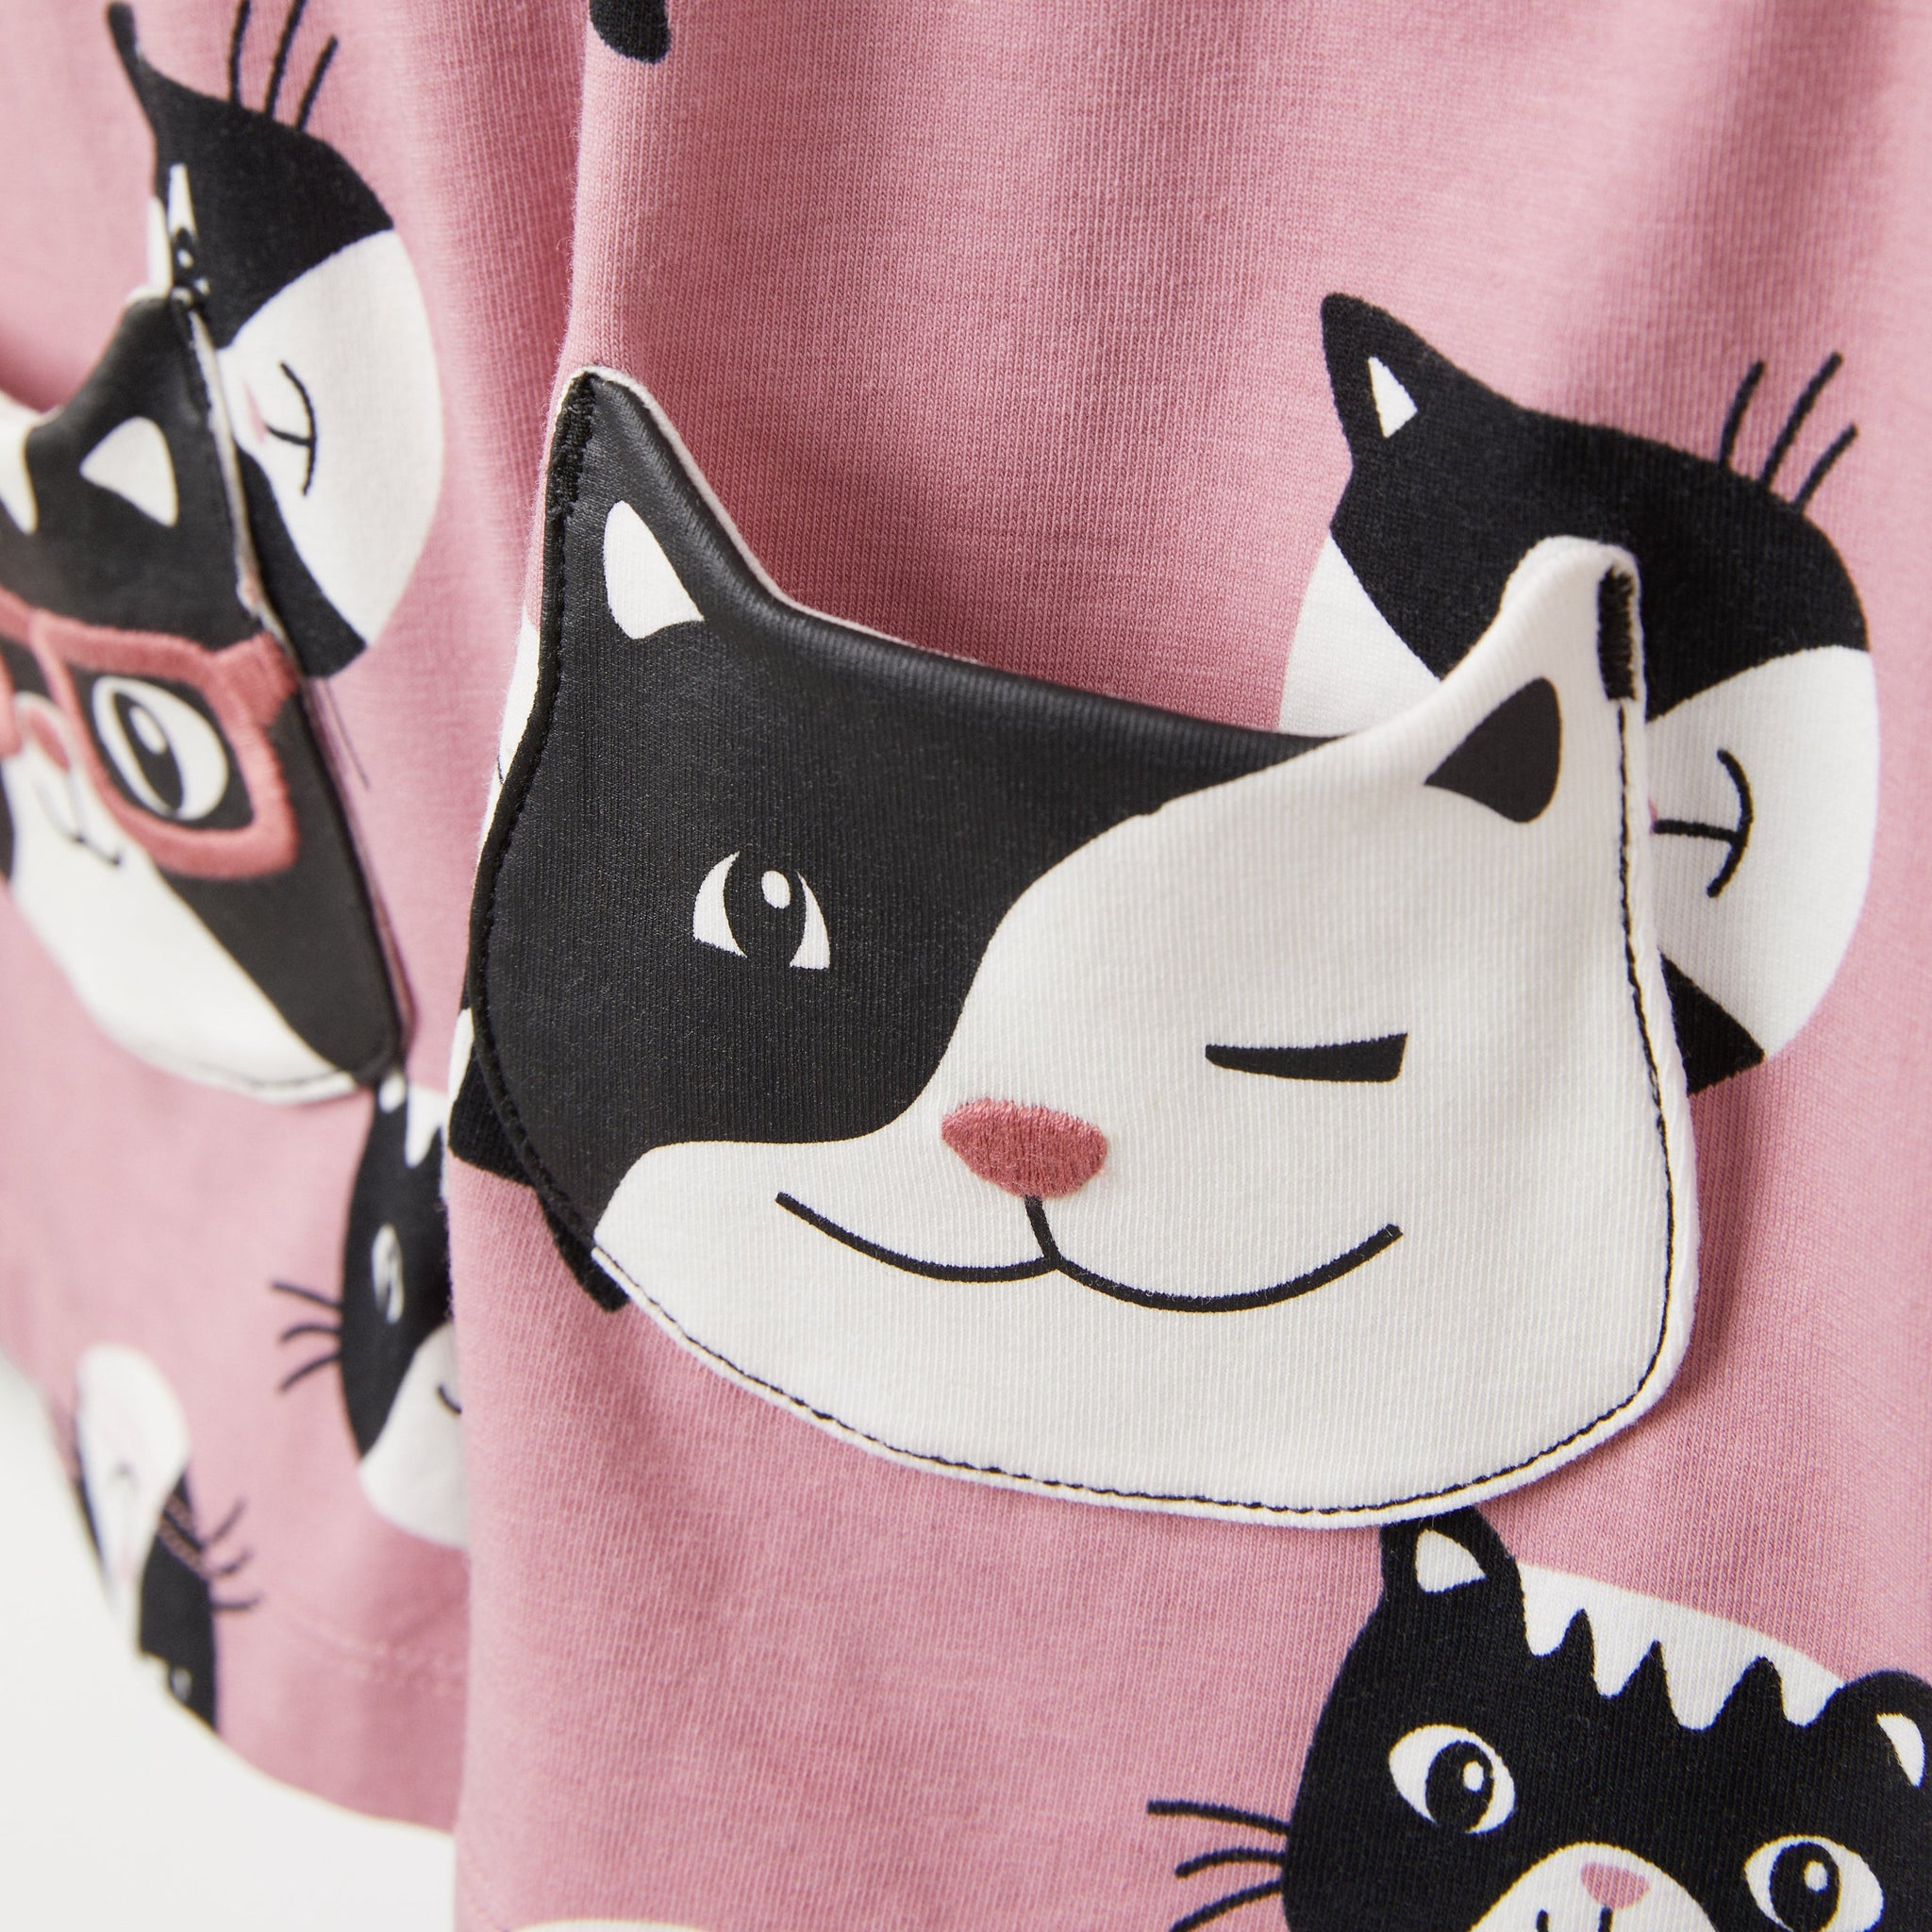 Organic Cotton Cat Print Girls Top from the Polarn O. Pyret Kidswear collection. Ethically produced kids clothing.